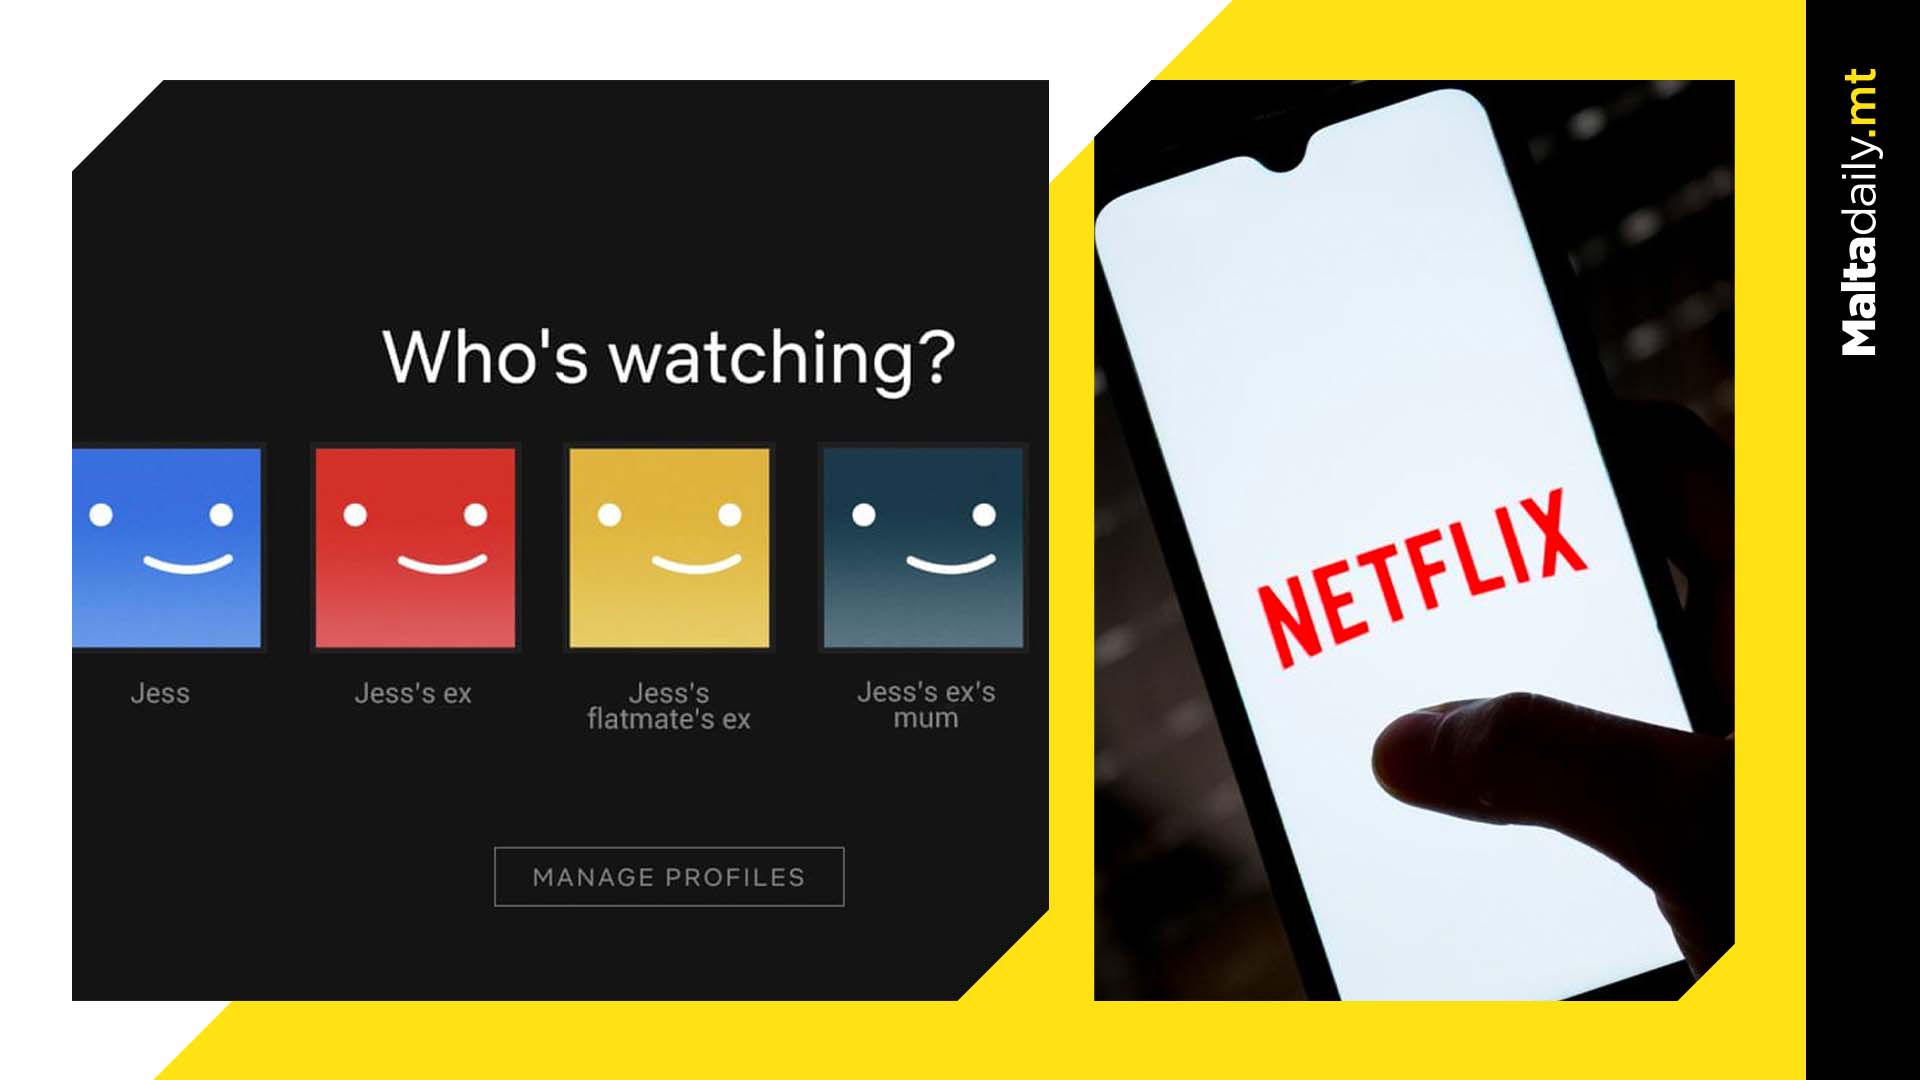 Netflix confirm users will be charged if they share accounts